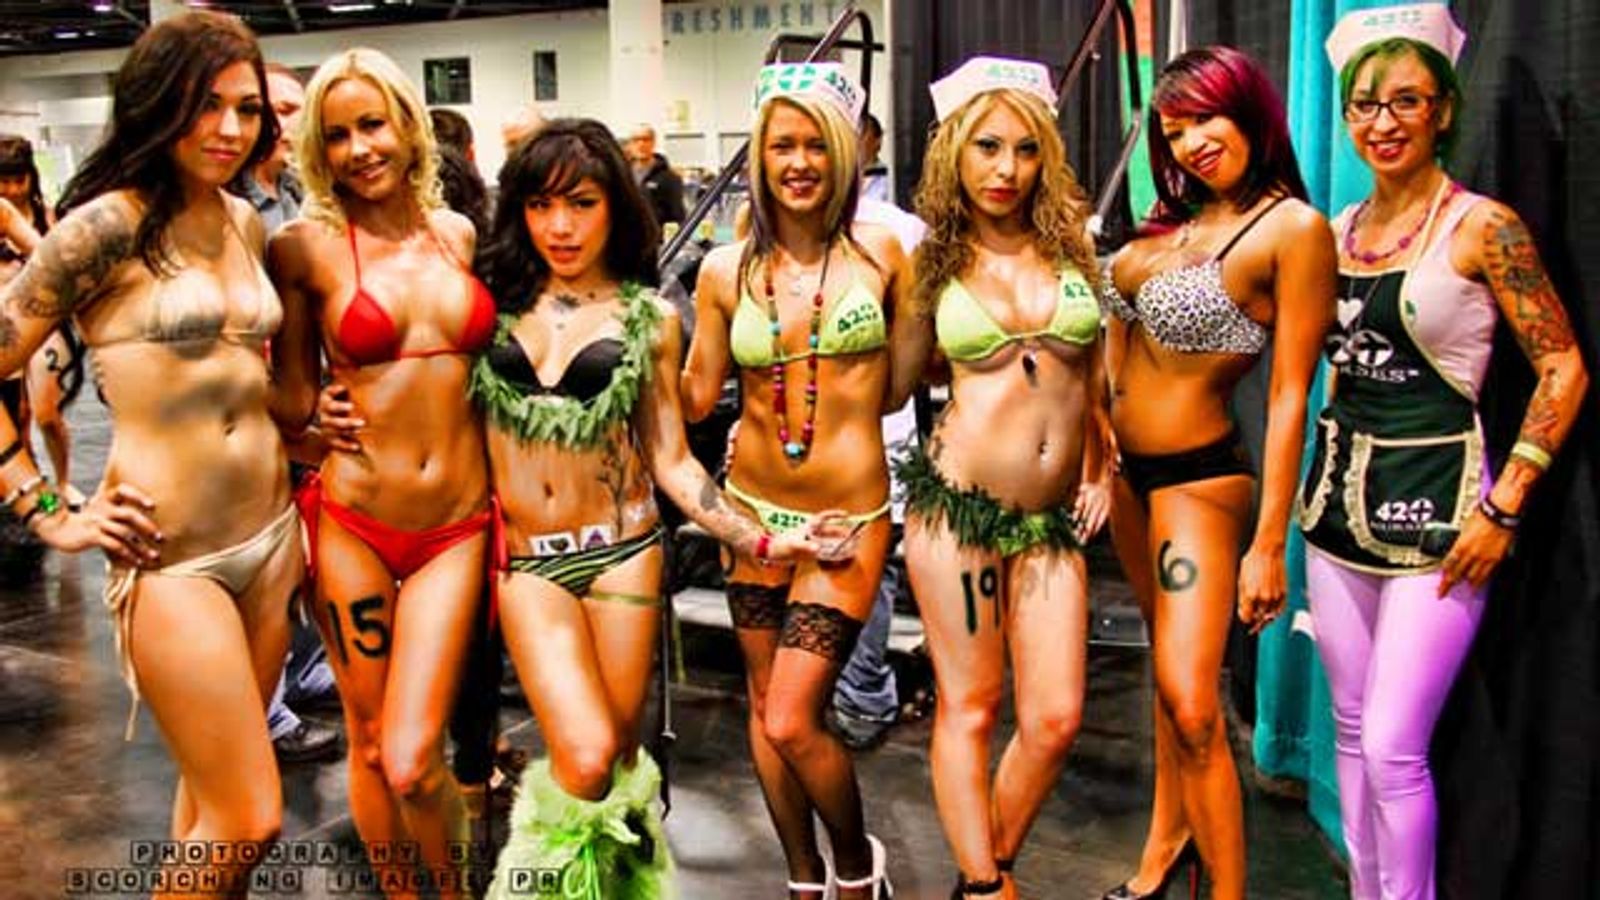 Kush Expo Returns This Weekend to Anaheim Convention Center